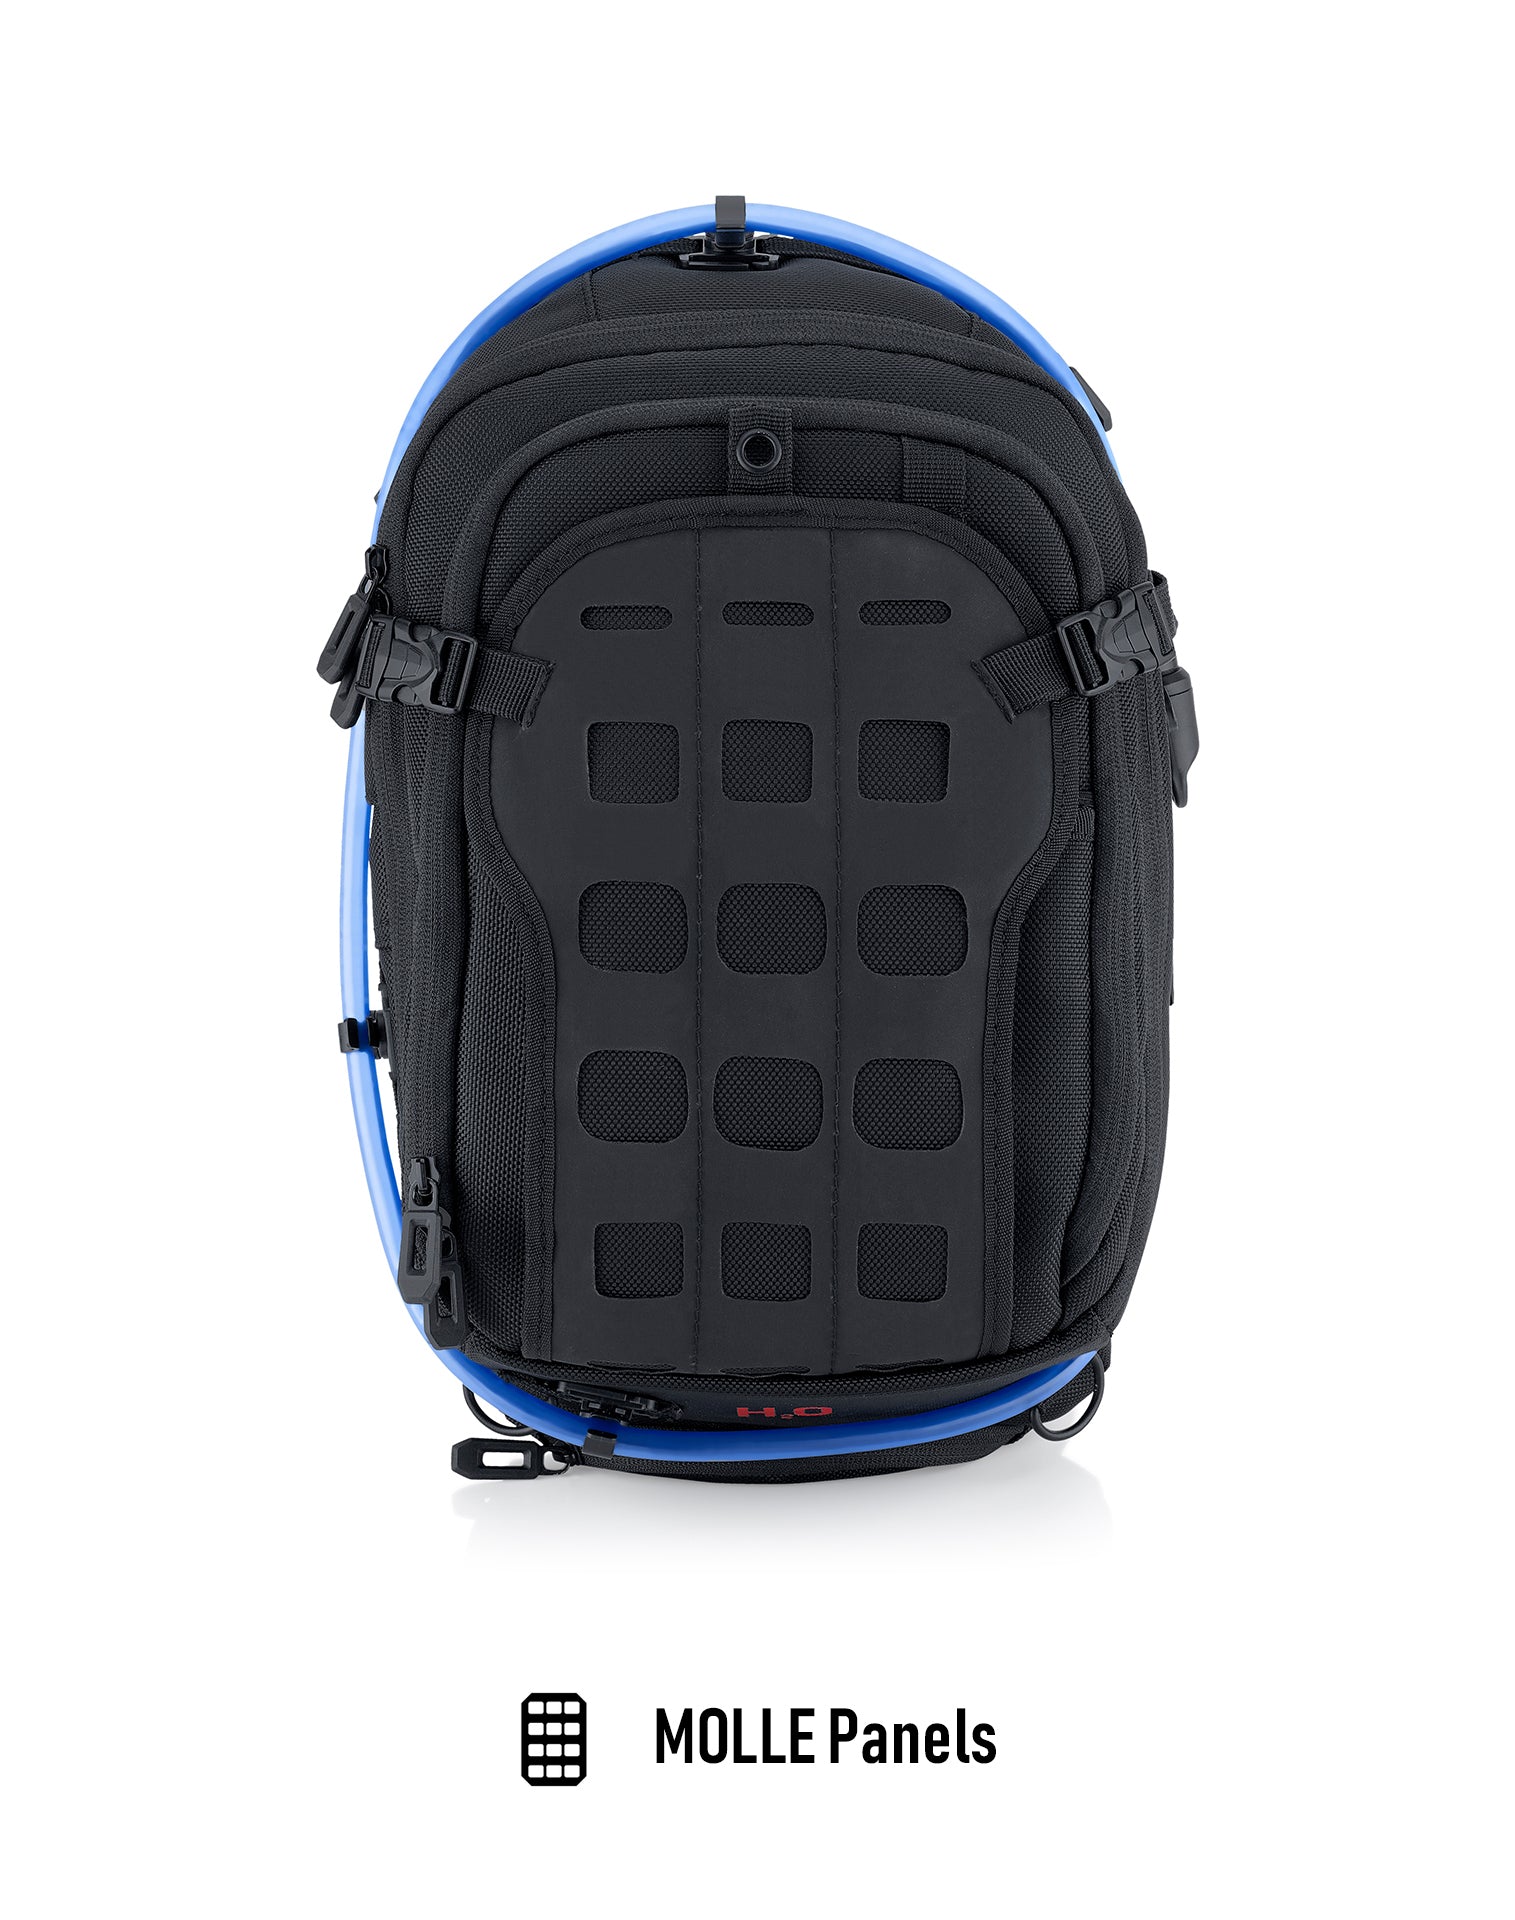 Viking Apex ADV Touring Backpack with Hydration Pack for Harley Davidson